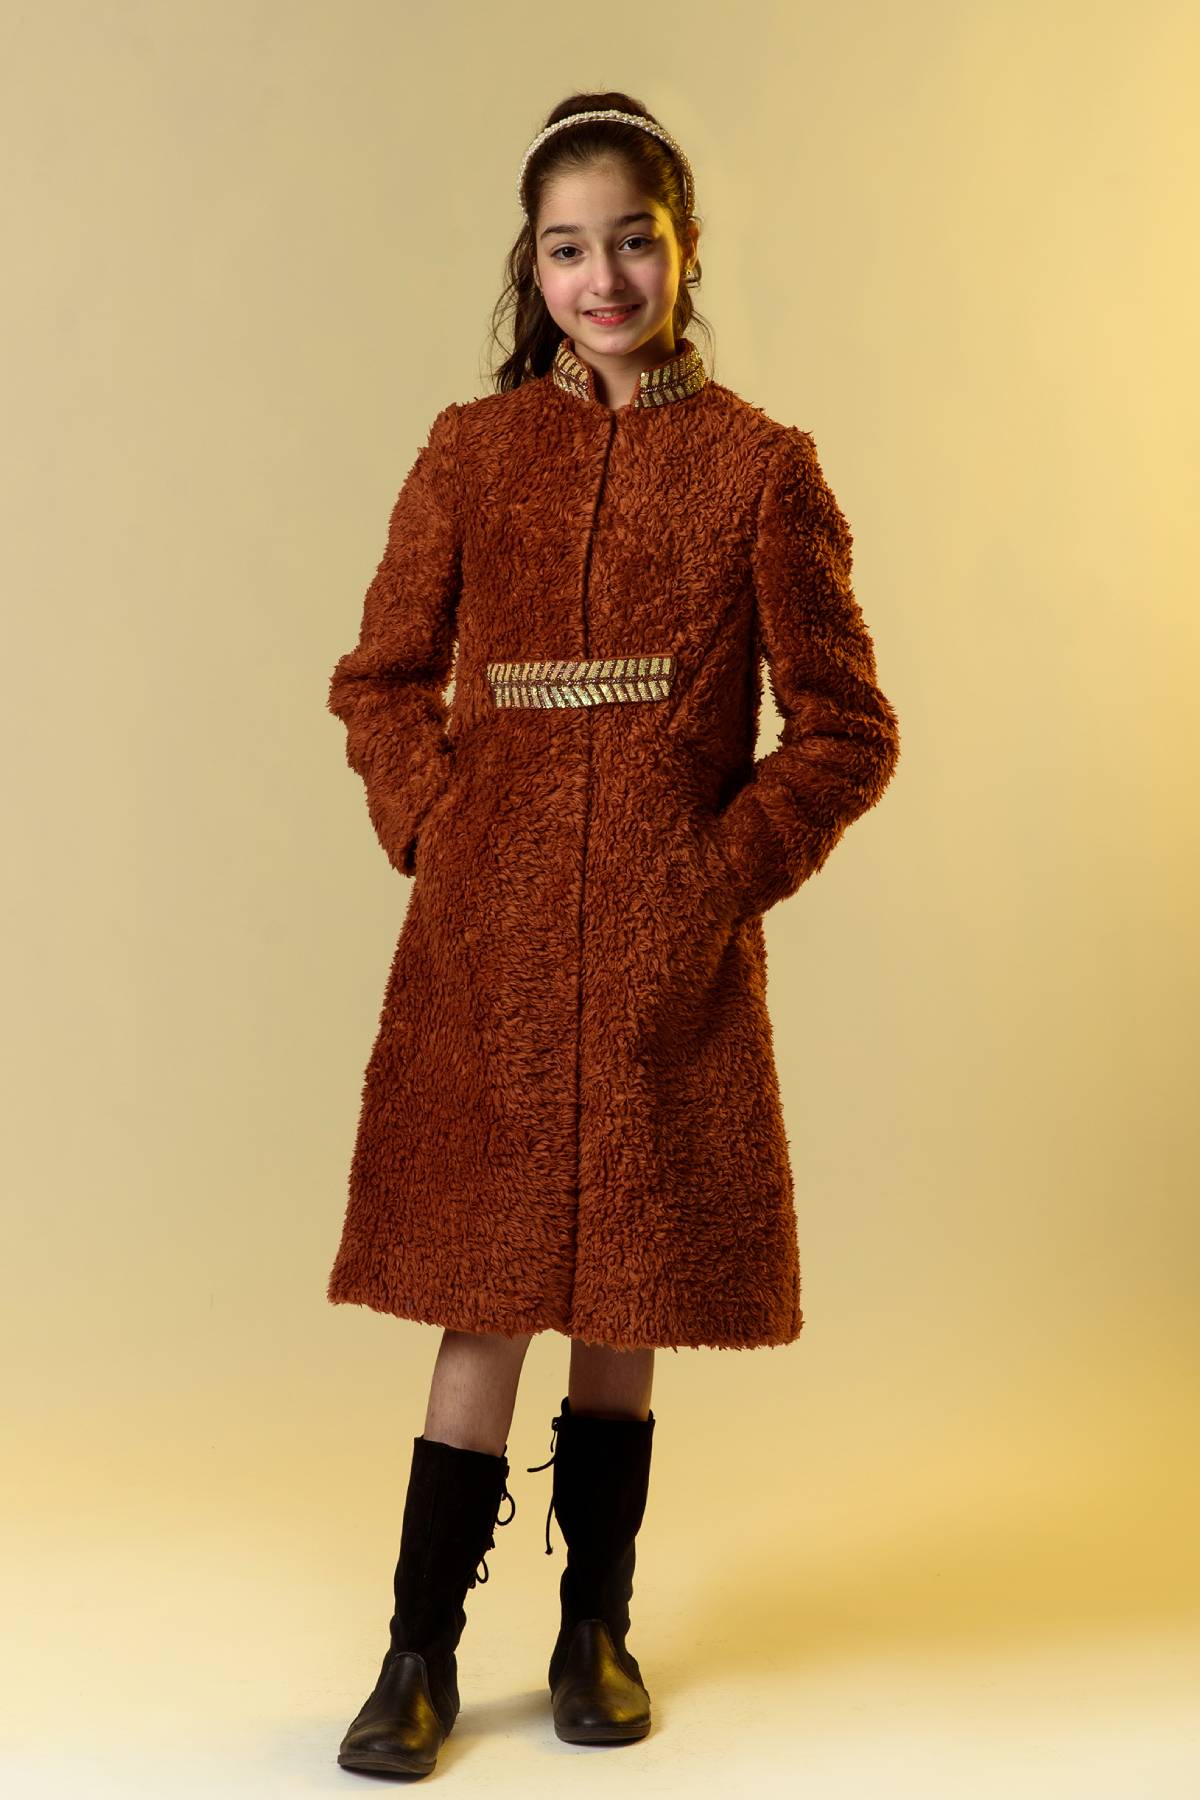 Buy Kids Designer Littleens Organic sherpa knit coat jacket with hand embroidery Online at ScrollnShops